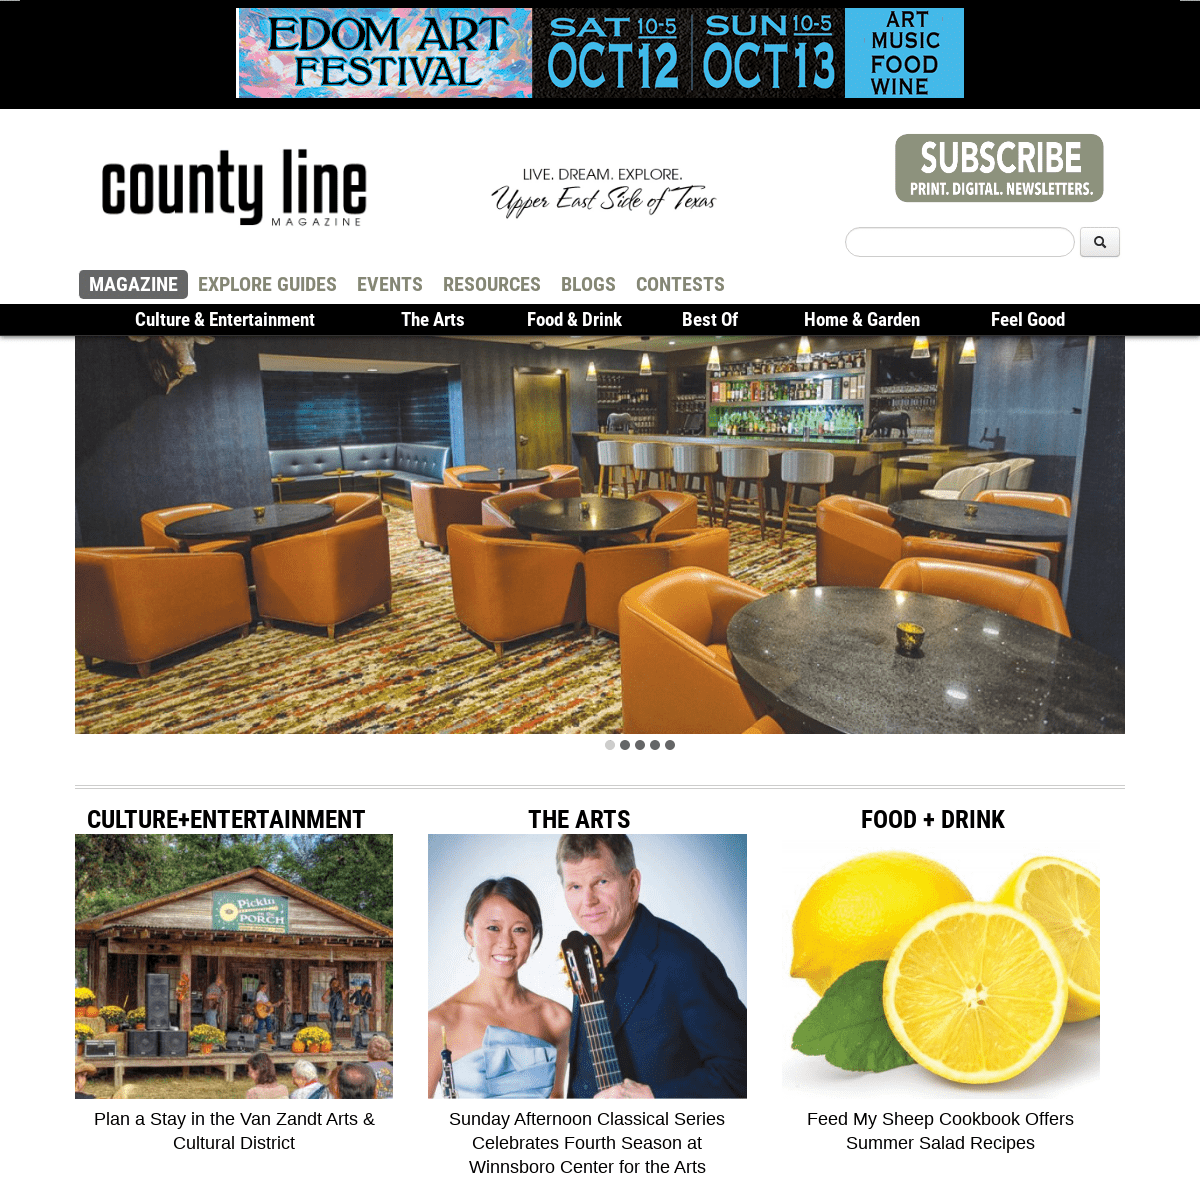 County Line Magazine: Arts, Music, Food, Events and more for the Upper East Side of Texas!